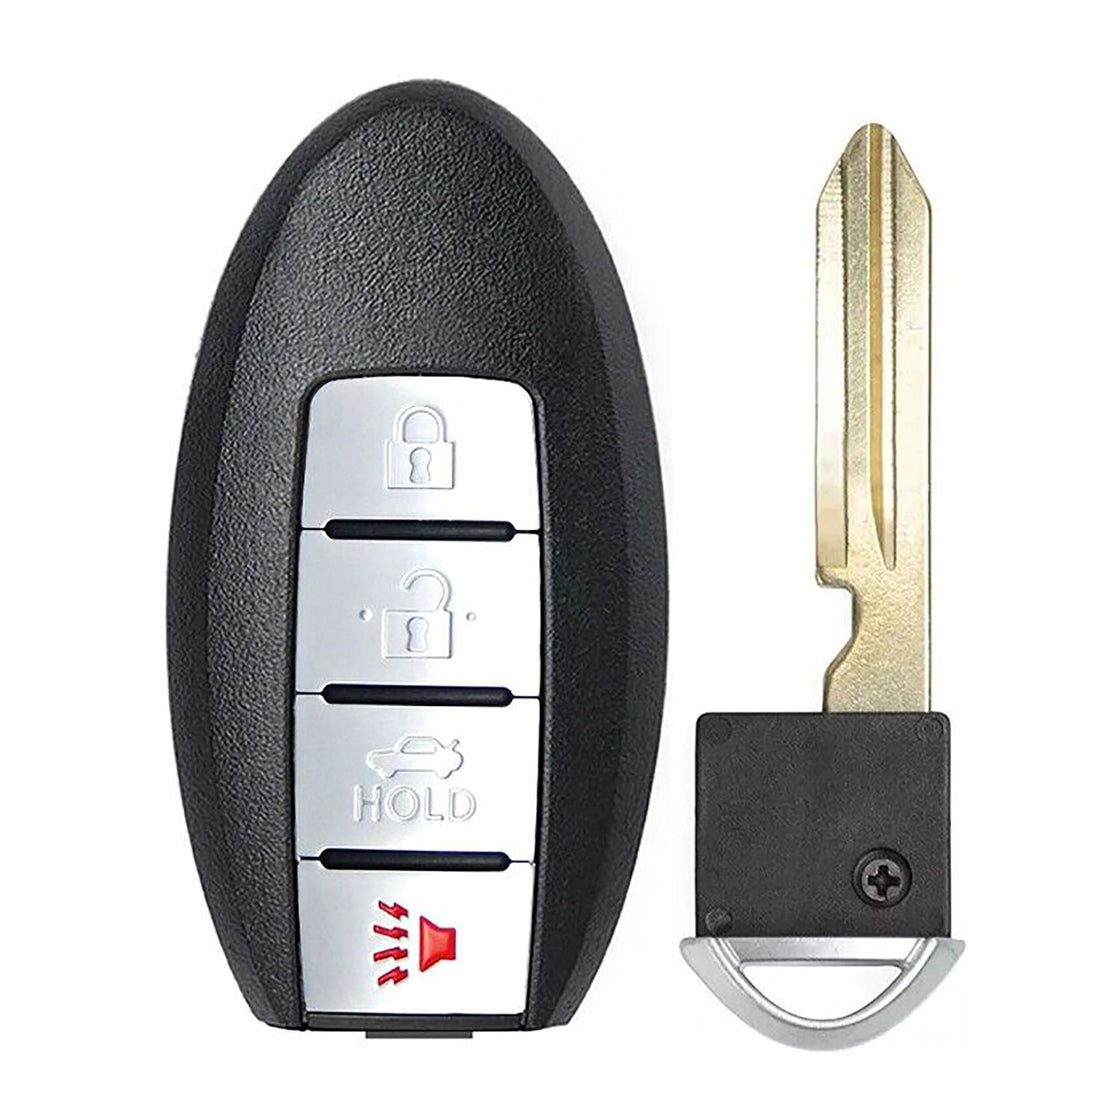 1x New Replacement Proximity Key Fob Compatible with & Fit For Nissan Vehicle. Read Description - MPN CWTWB1U815-02